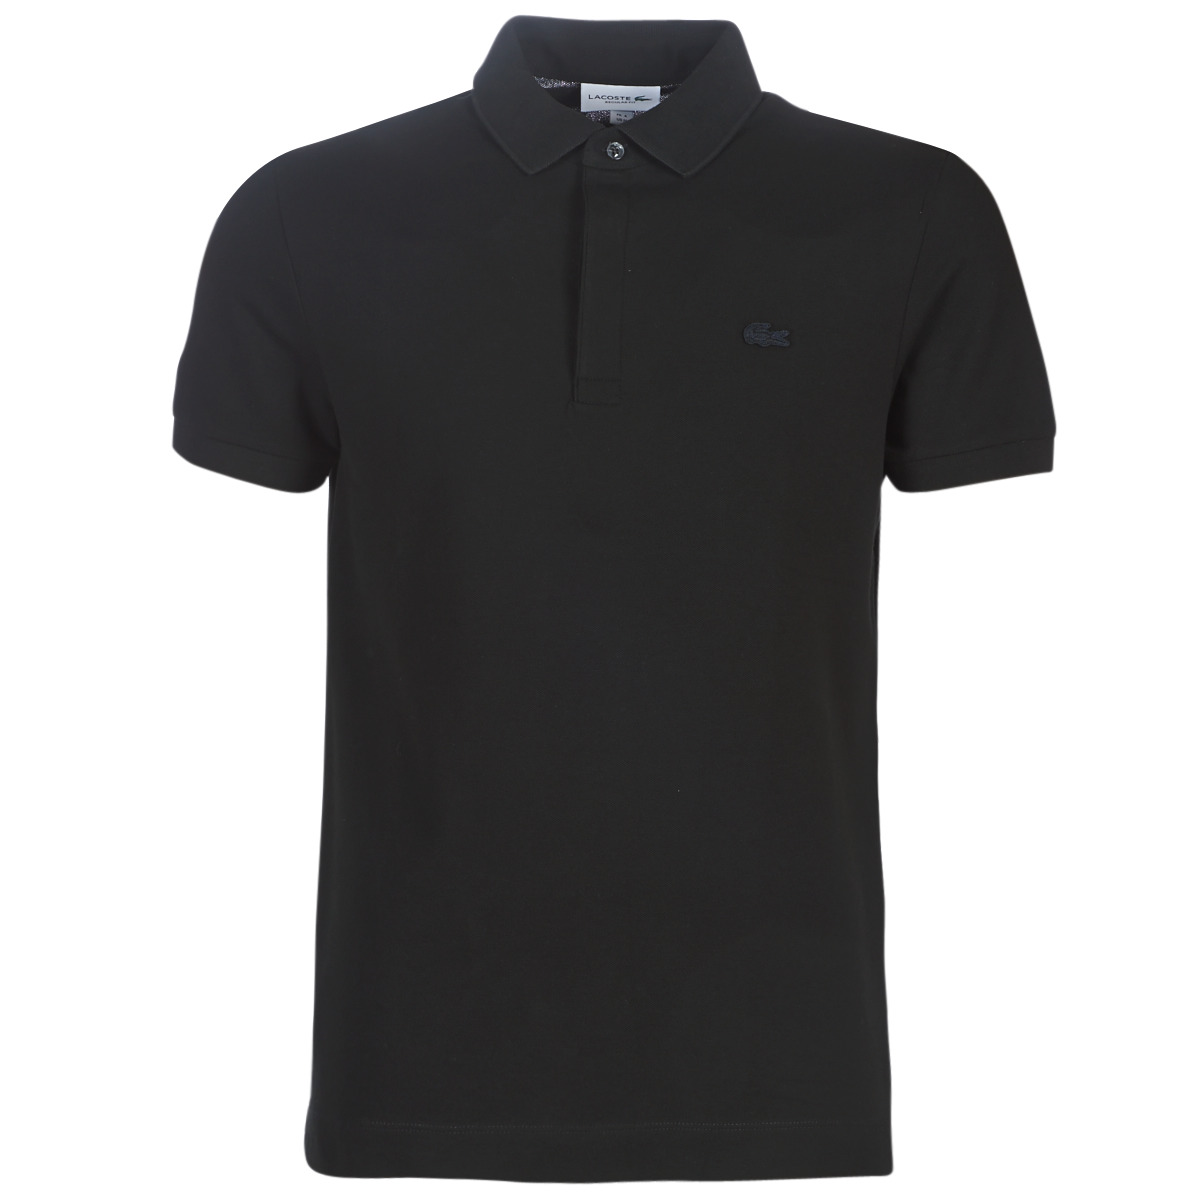 lacoste black and white polo shirt